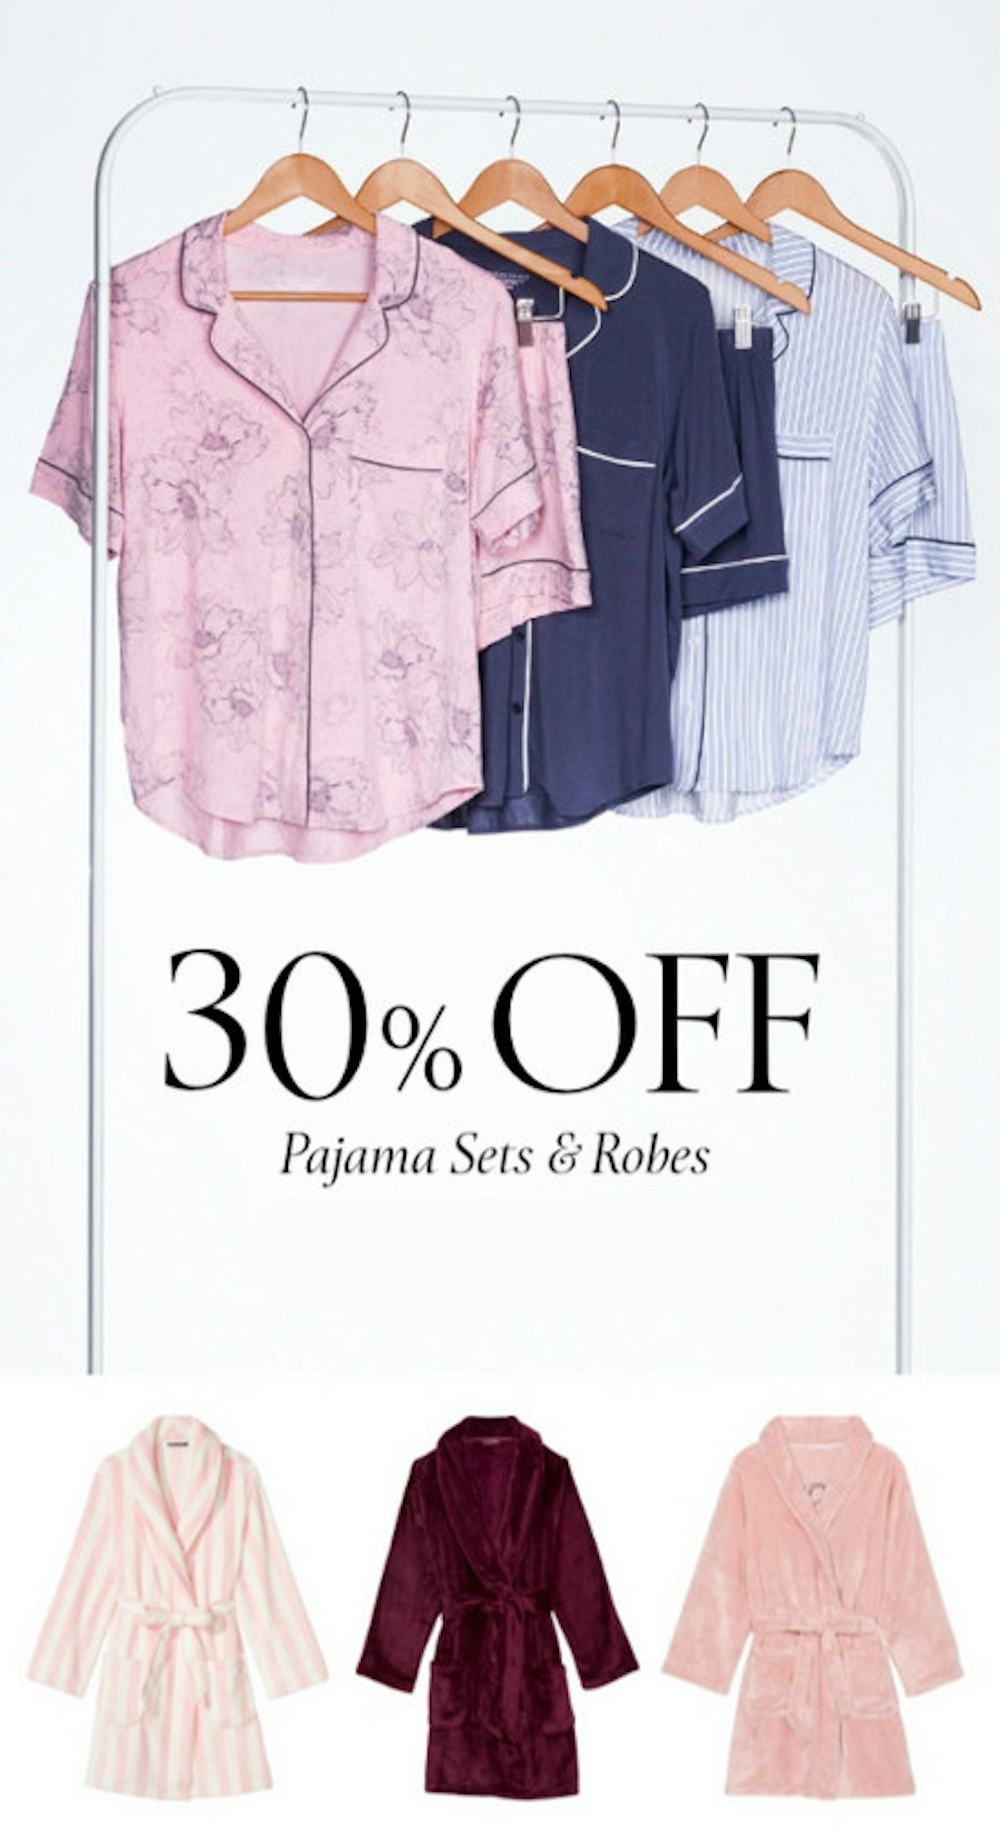 30% off Pajama Sets and Robes